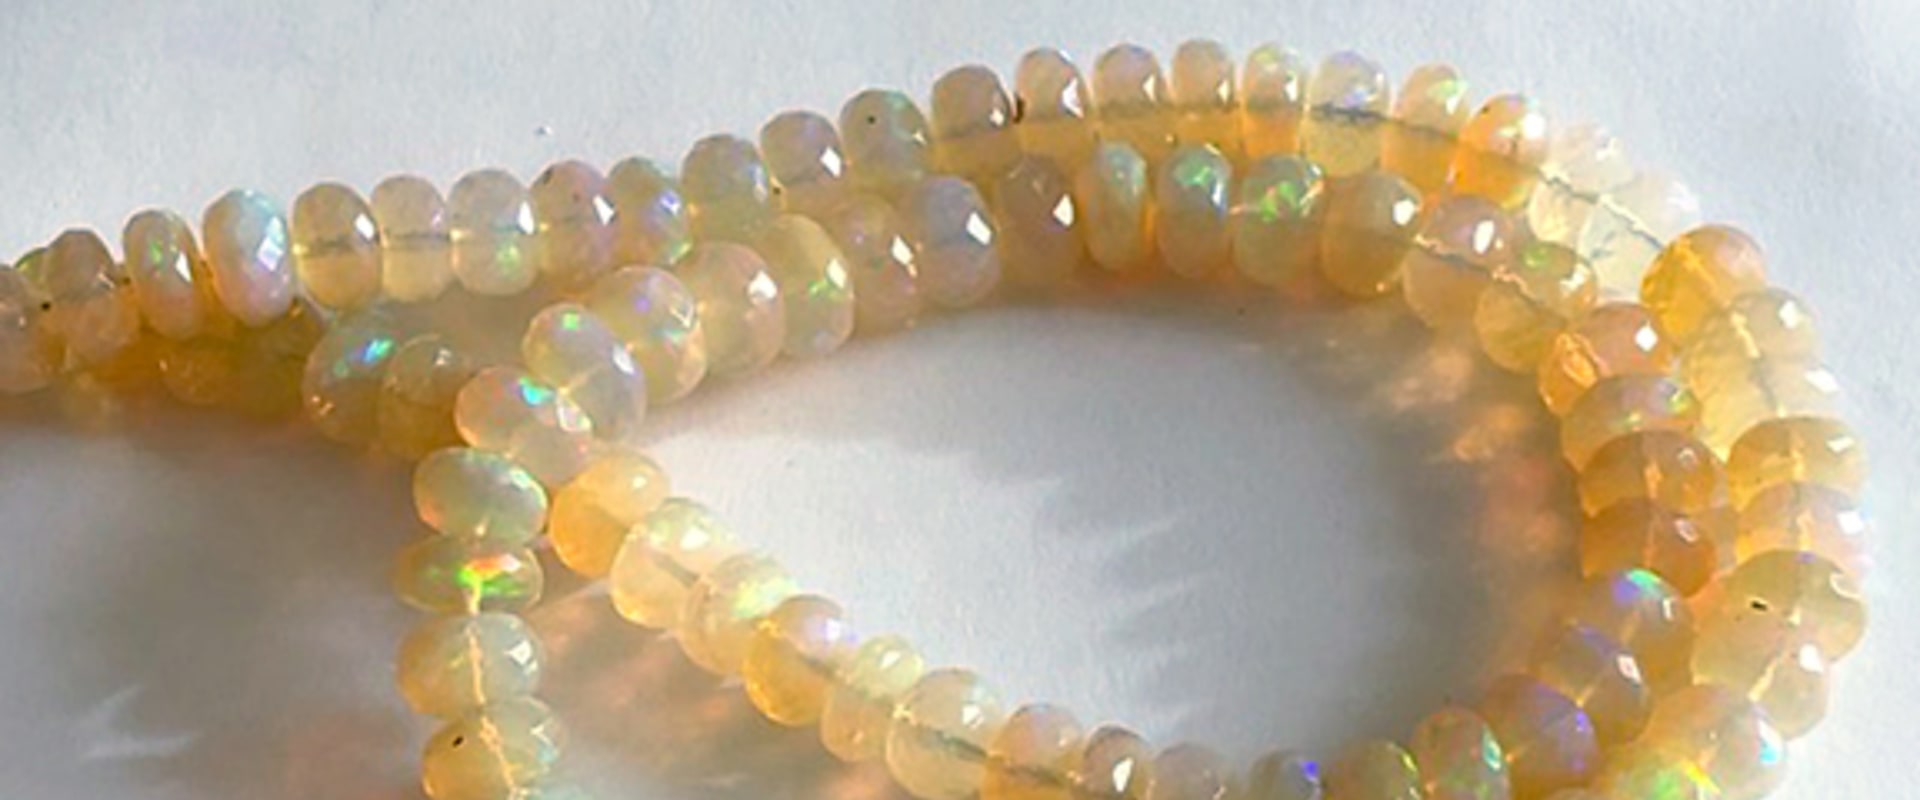 What makes an opal change color?